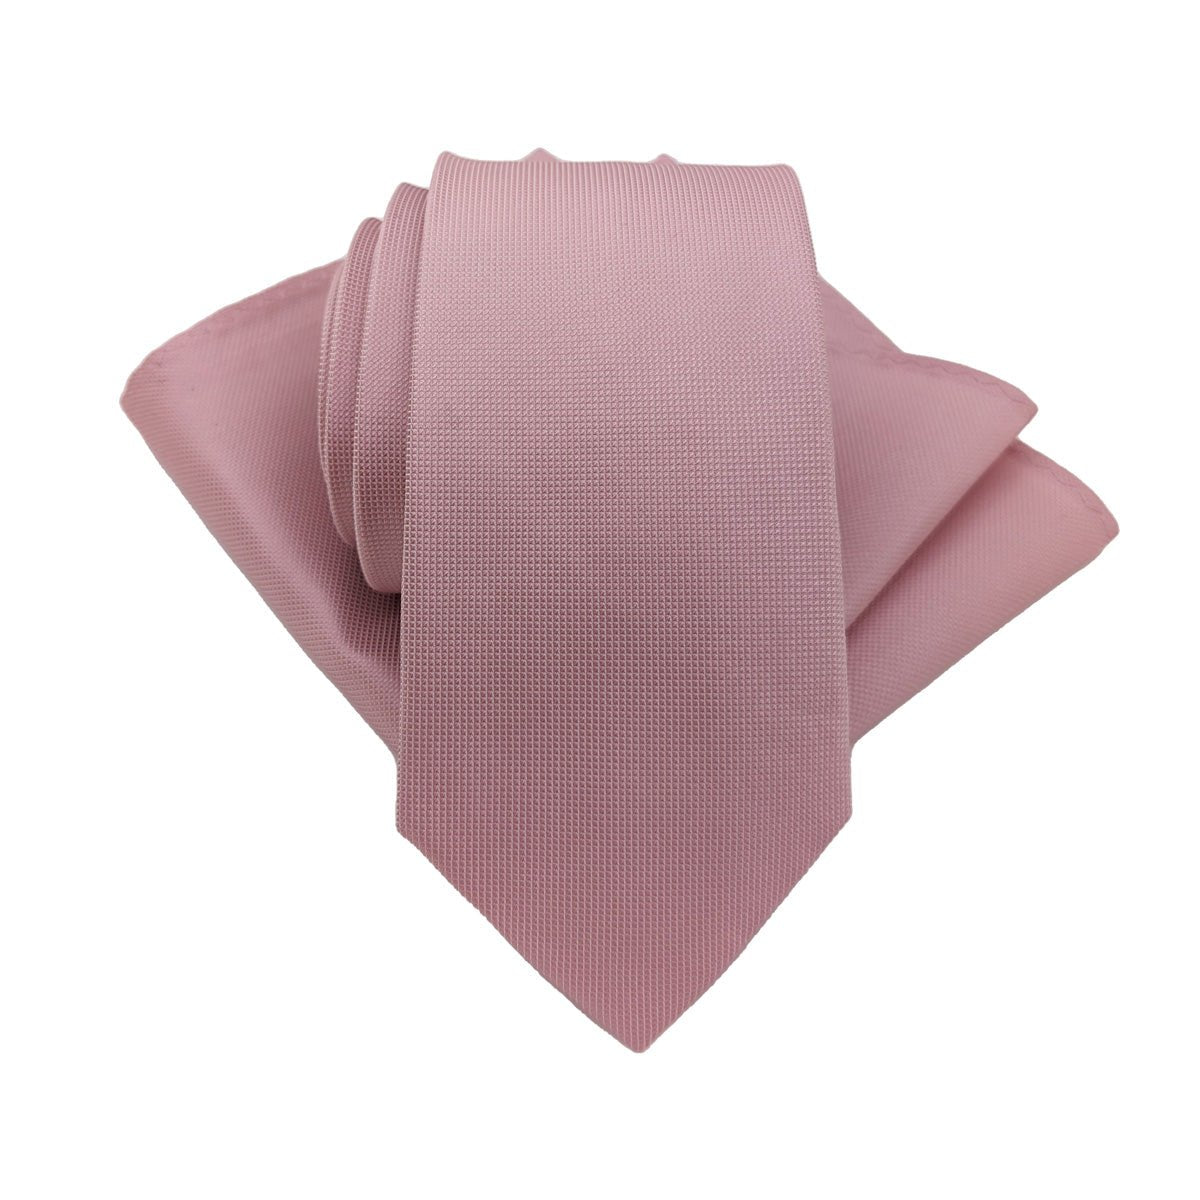 Dusty Rose Silk Pocket Square - Wedding Pocket Square - - Swagger & Swoon